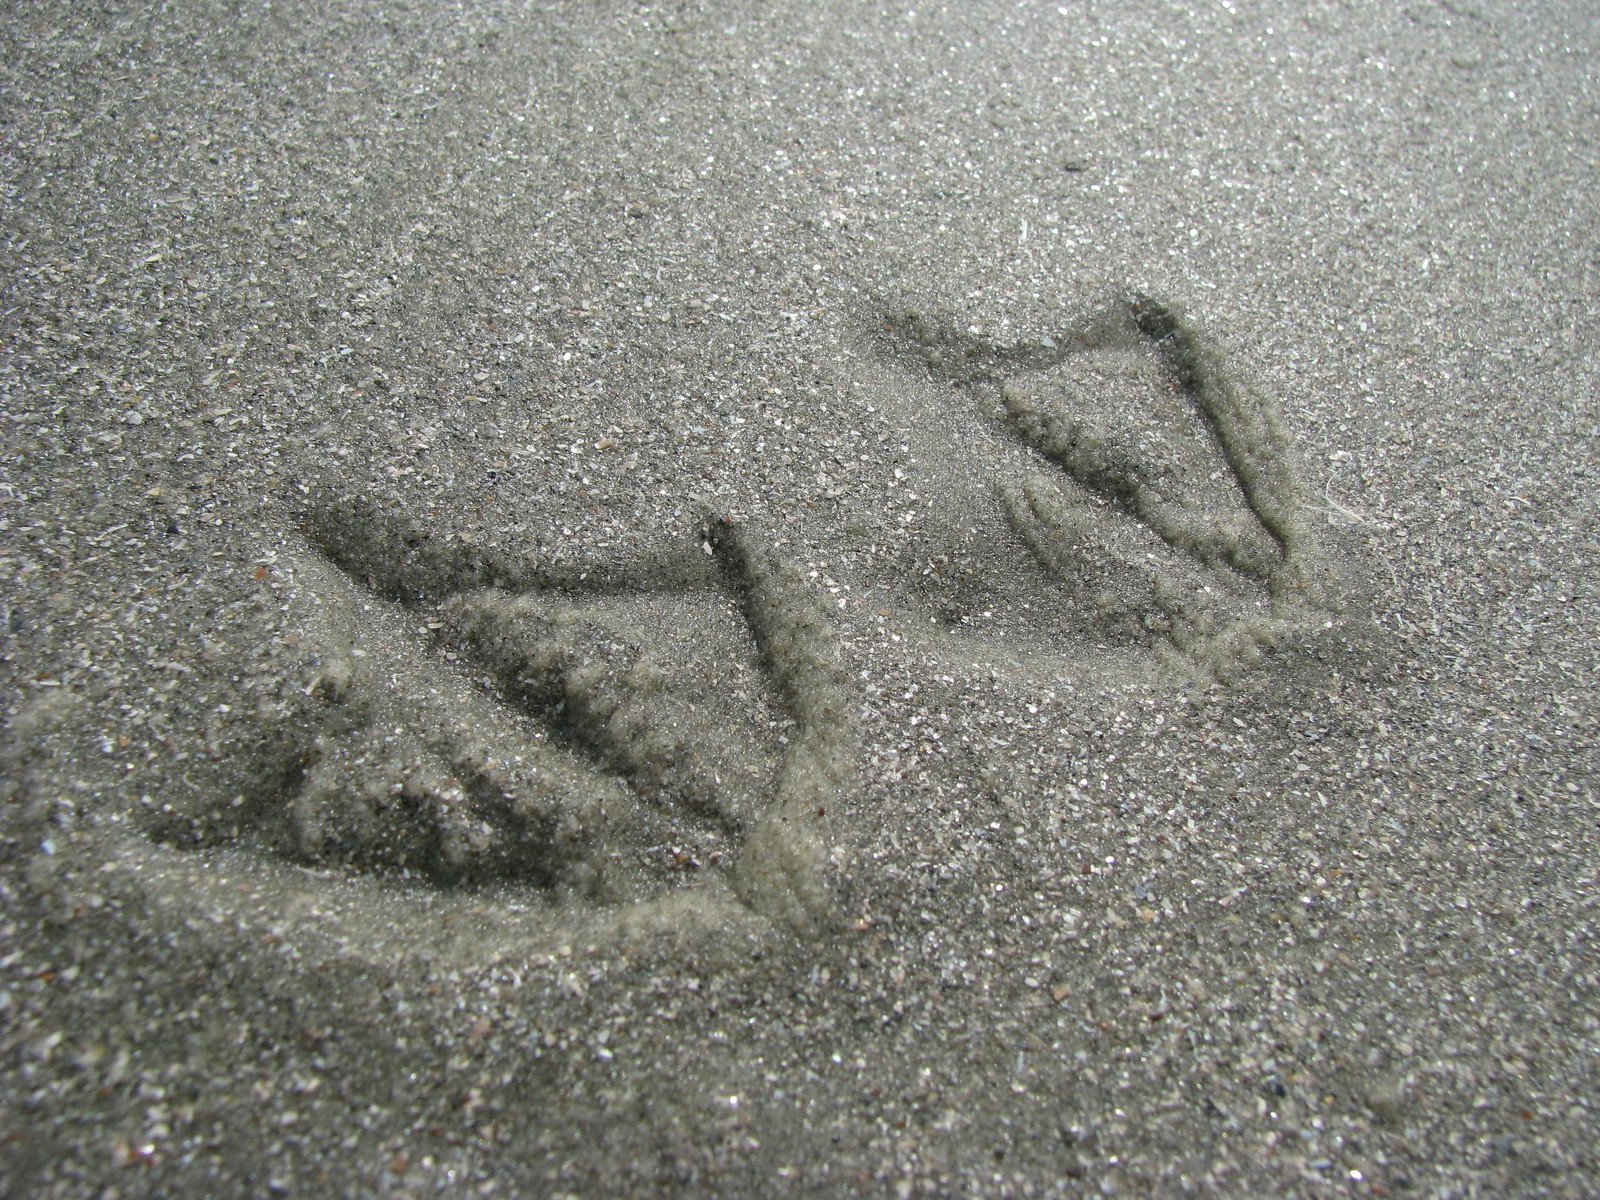 a picture of some footprints in the sand